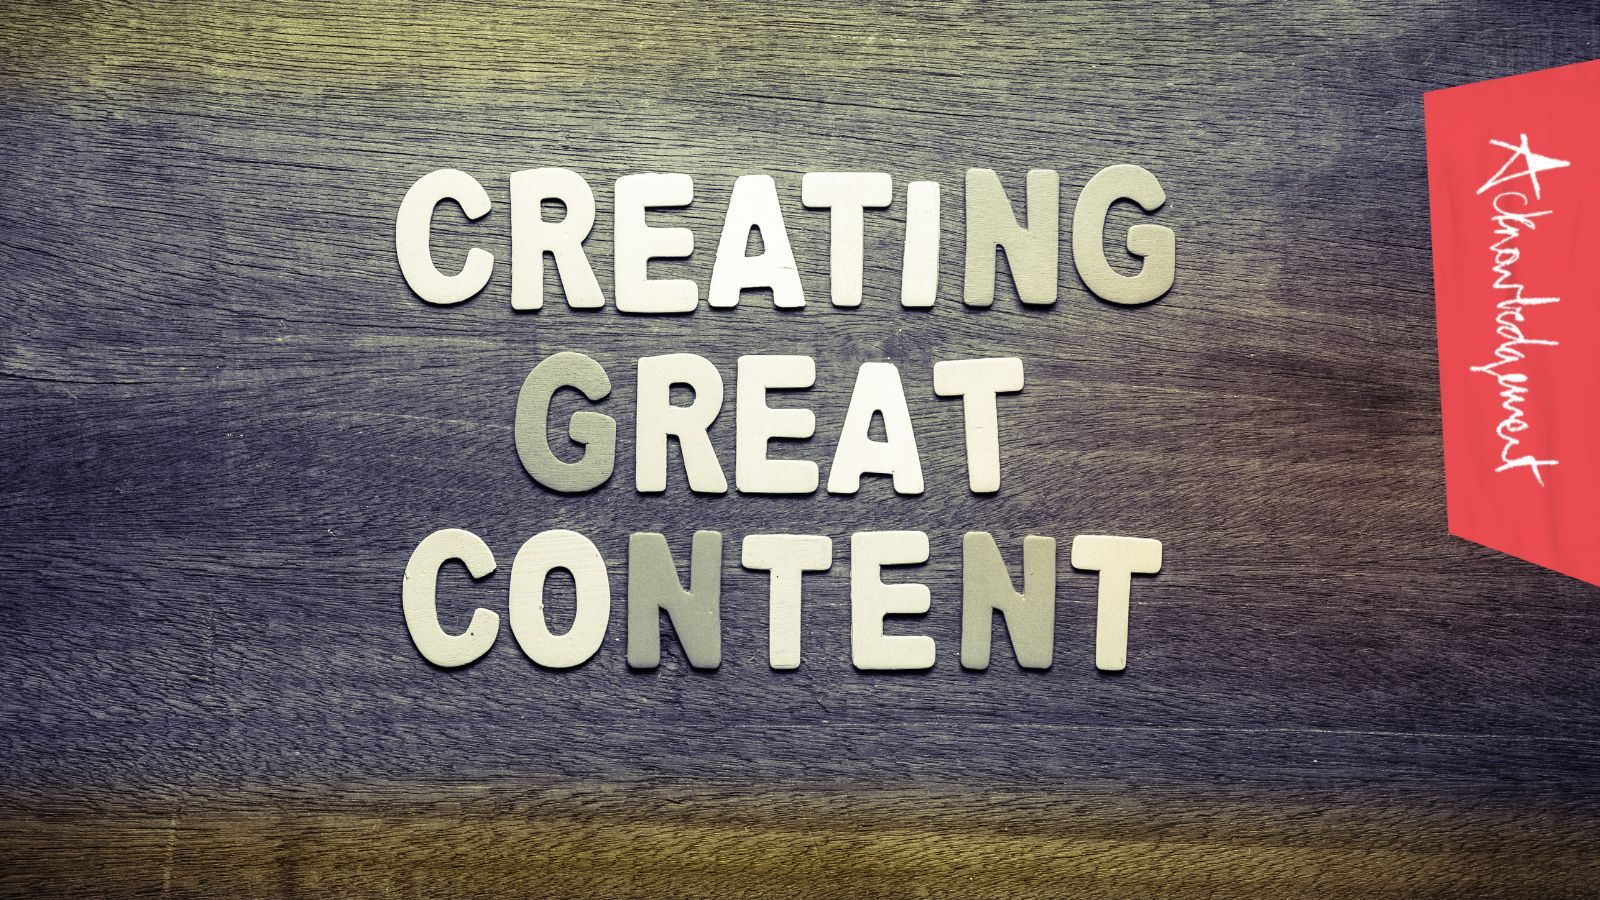 "Creating great content" title graphic